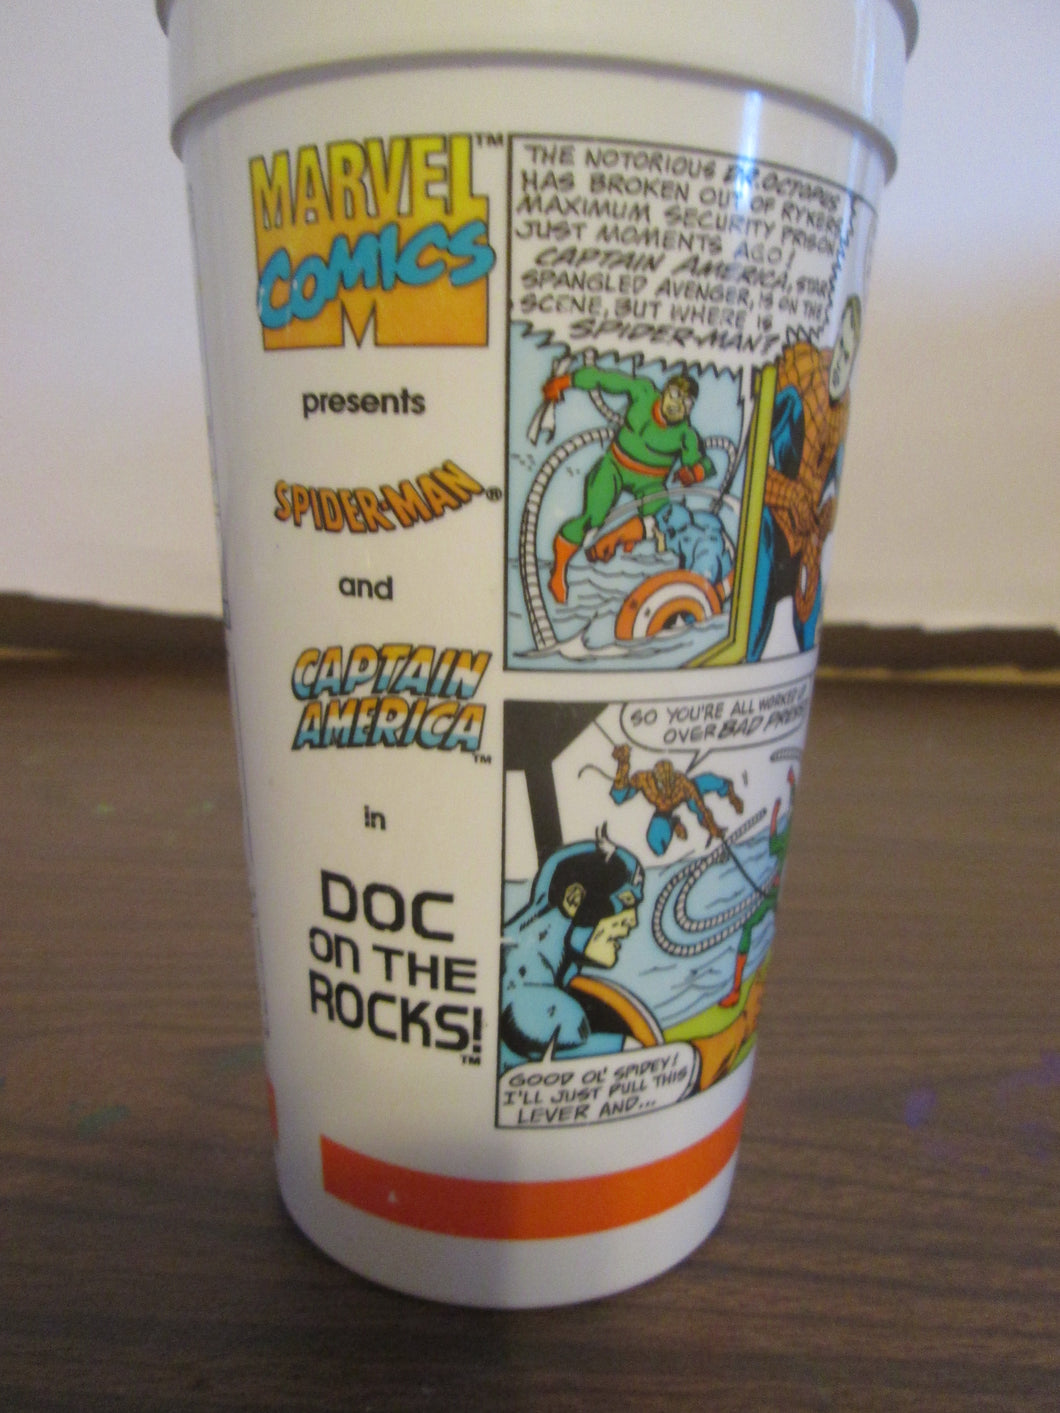 Hardees Marvel Comics presents Spider-Man and Captain America comic cup used 1990